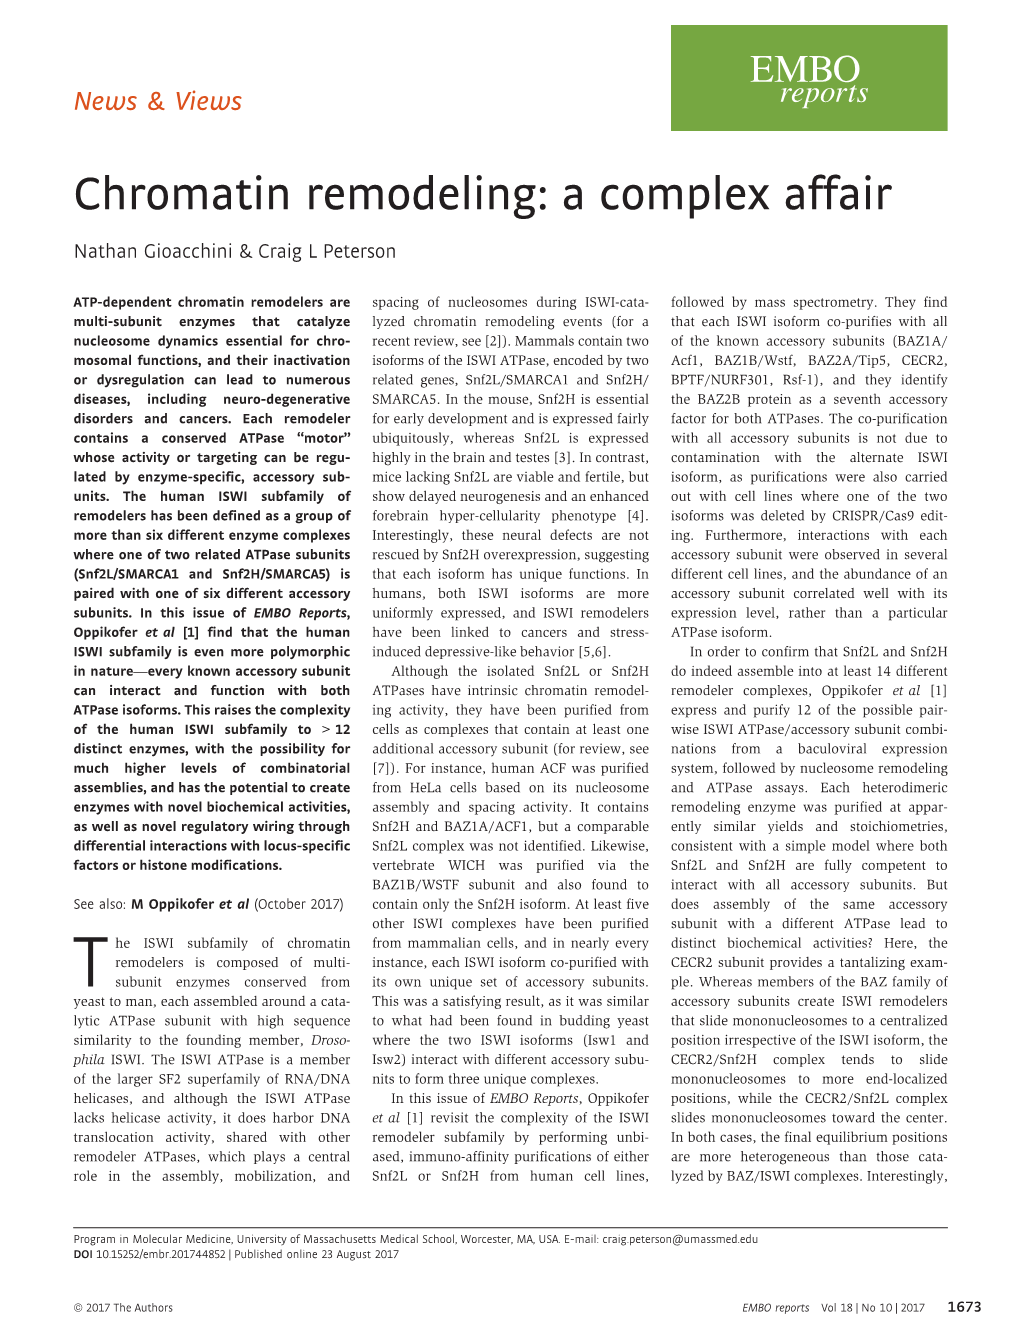 Chromatin Remodeling: a Complex Affair